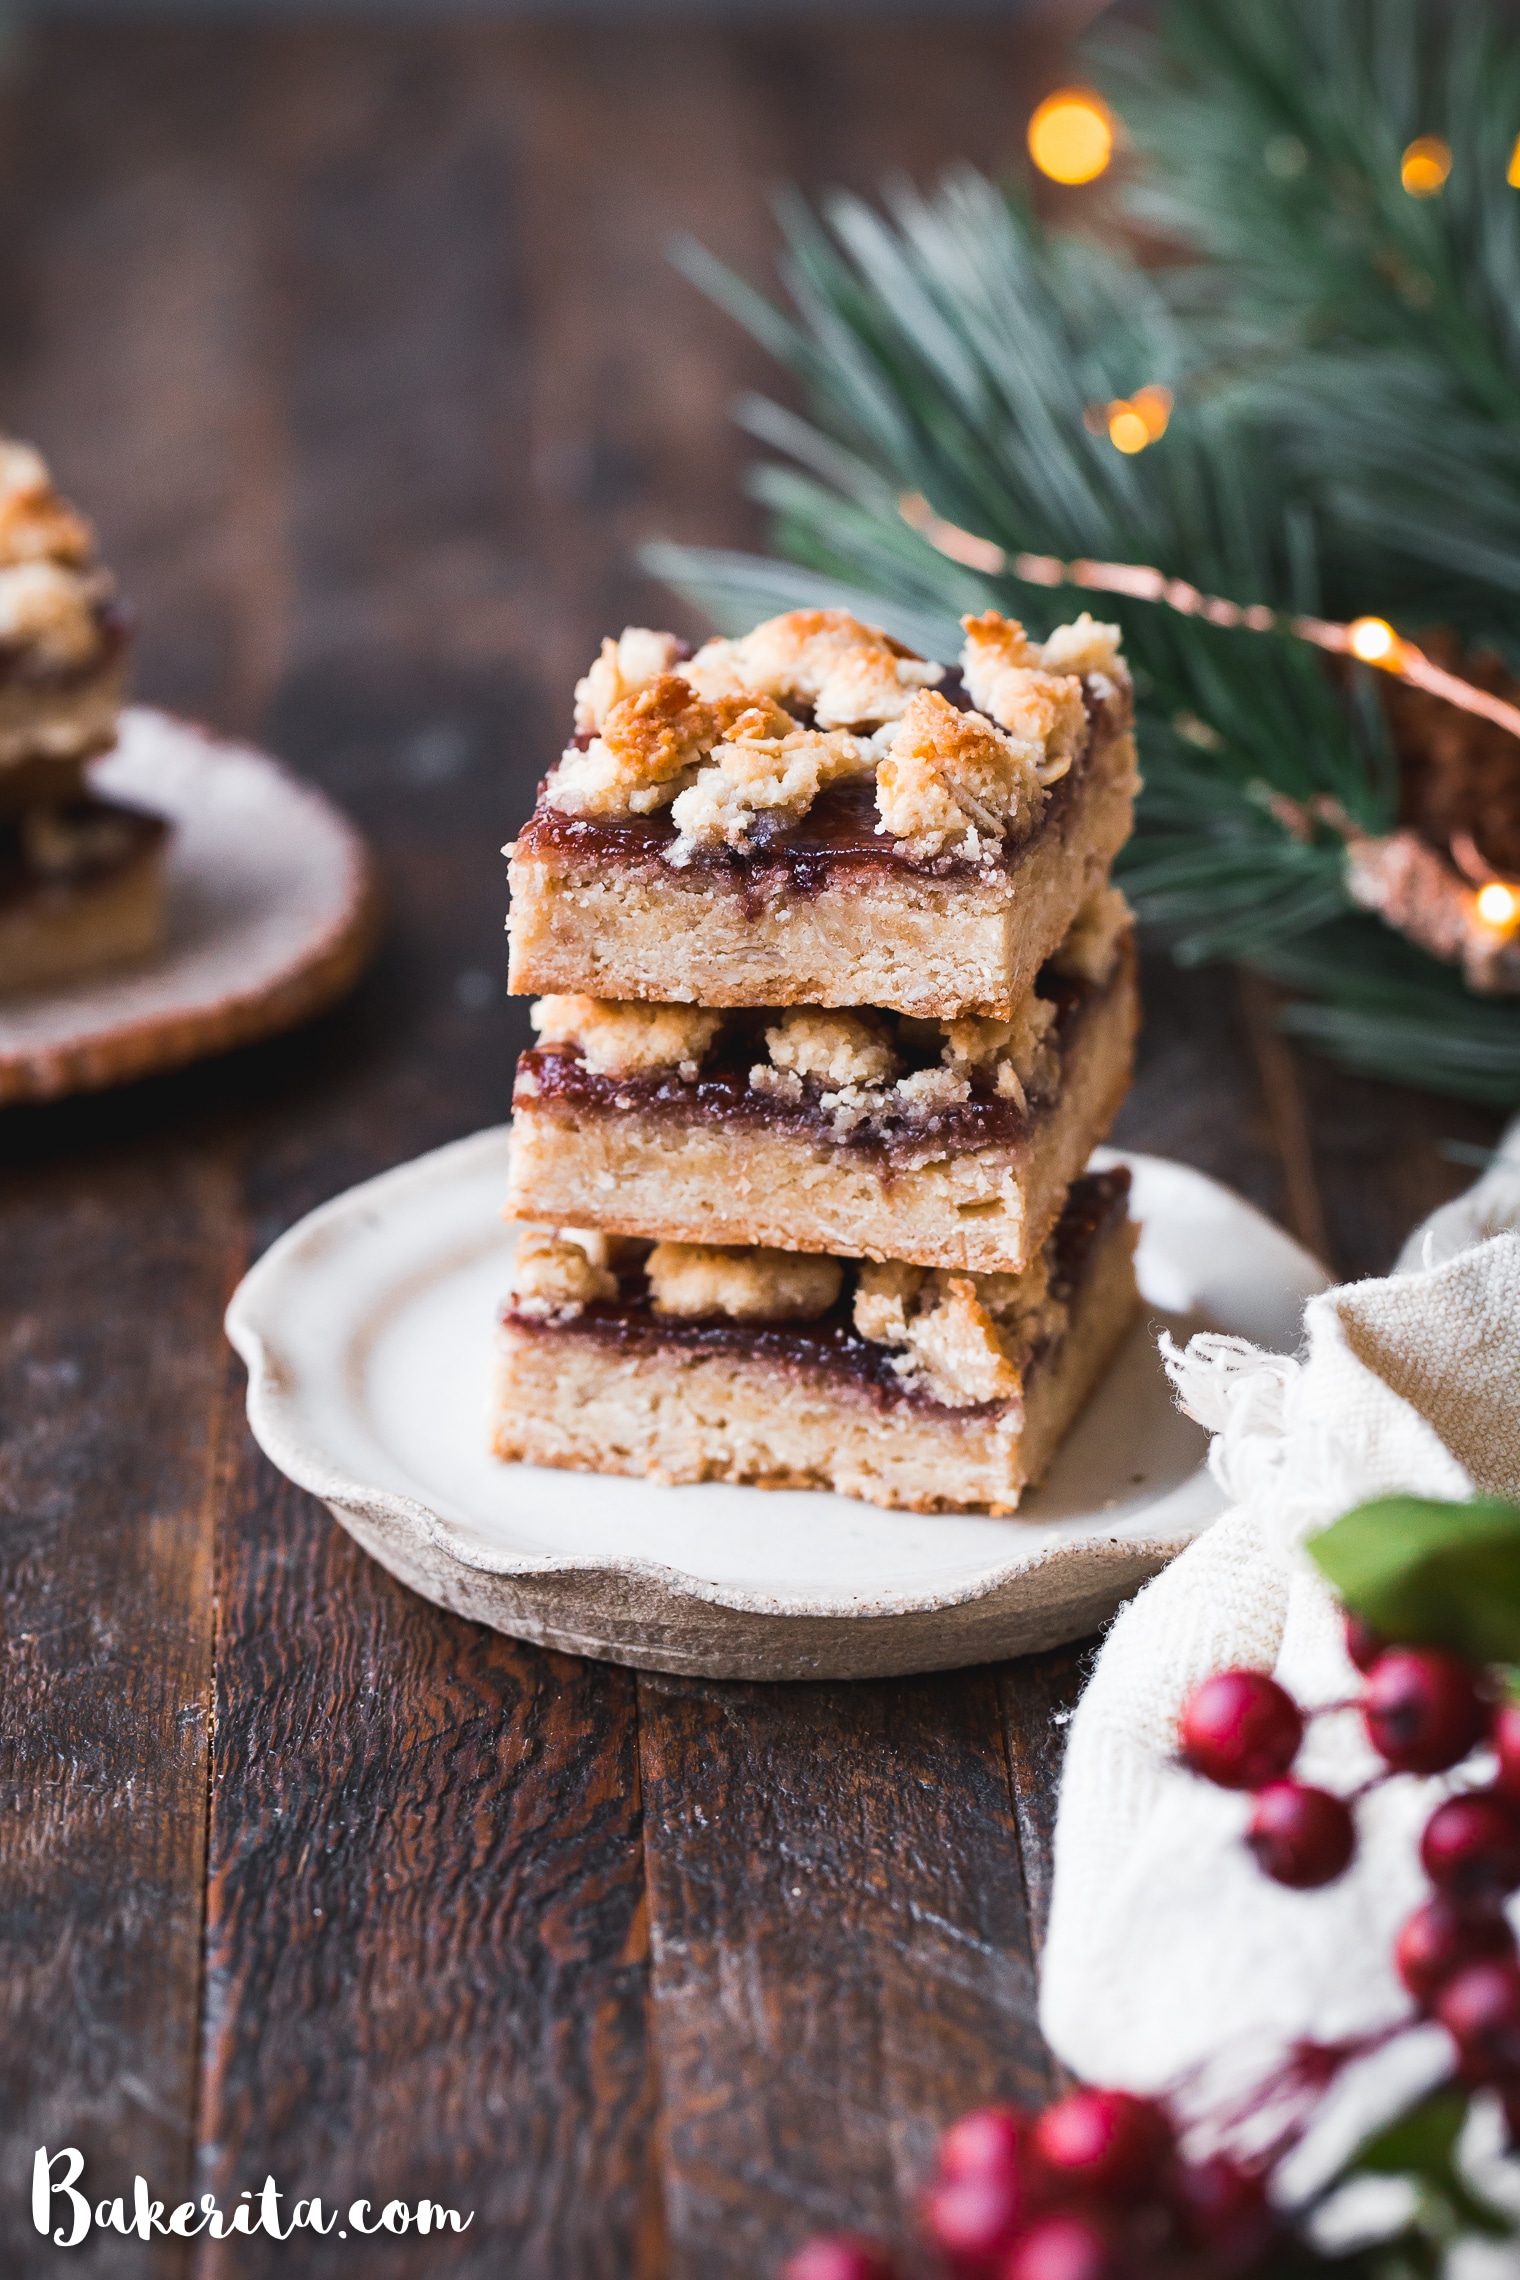 These Gluten-Free Vegan Jam Bars are made with a scrumptious oatmeal crumble crust that doubles as a crumb topping and a thick layer of jam in the middle. They're the perfect easy, vegan holiday dessert.